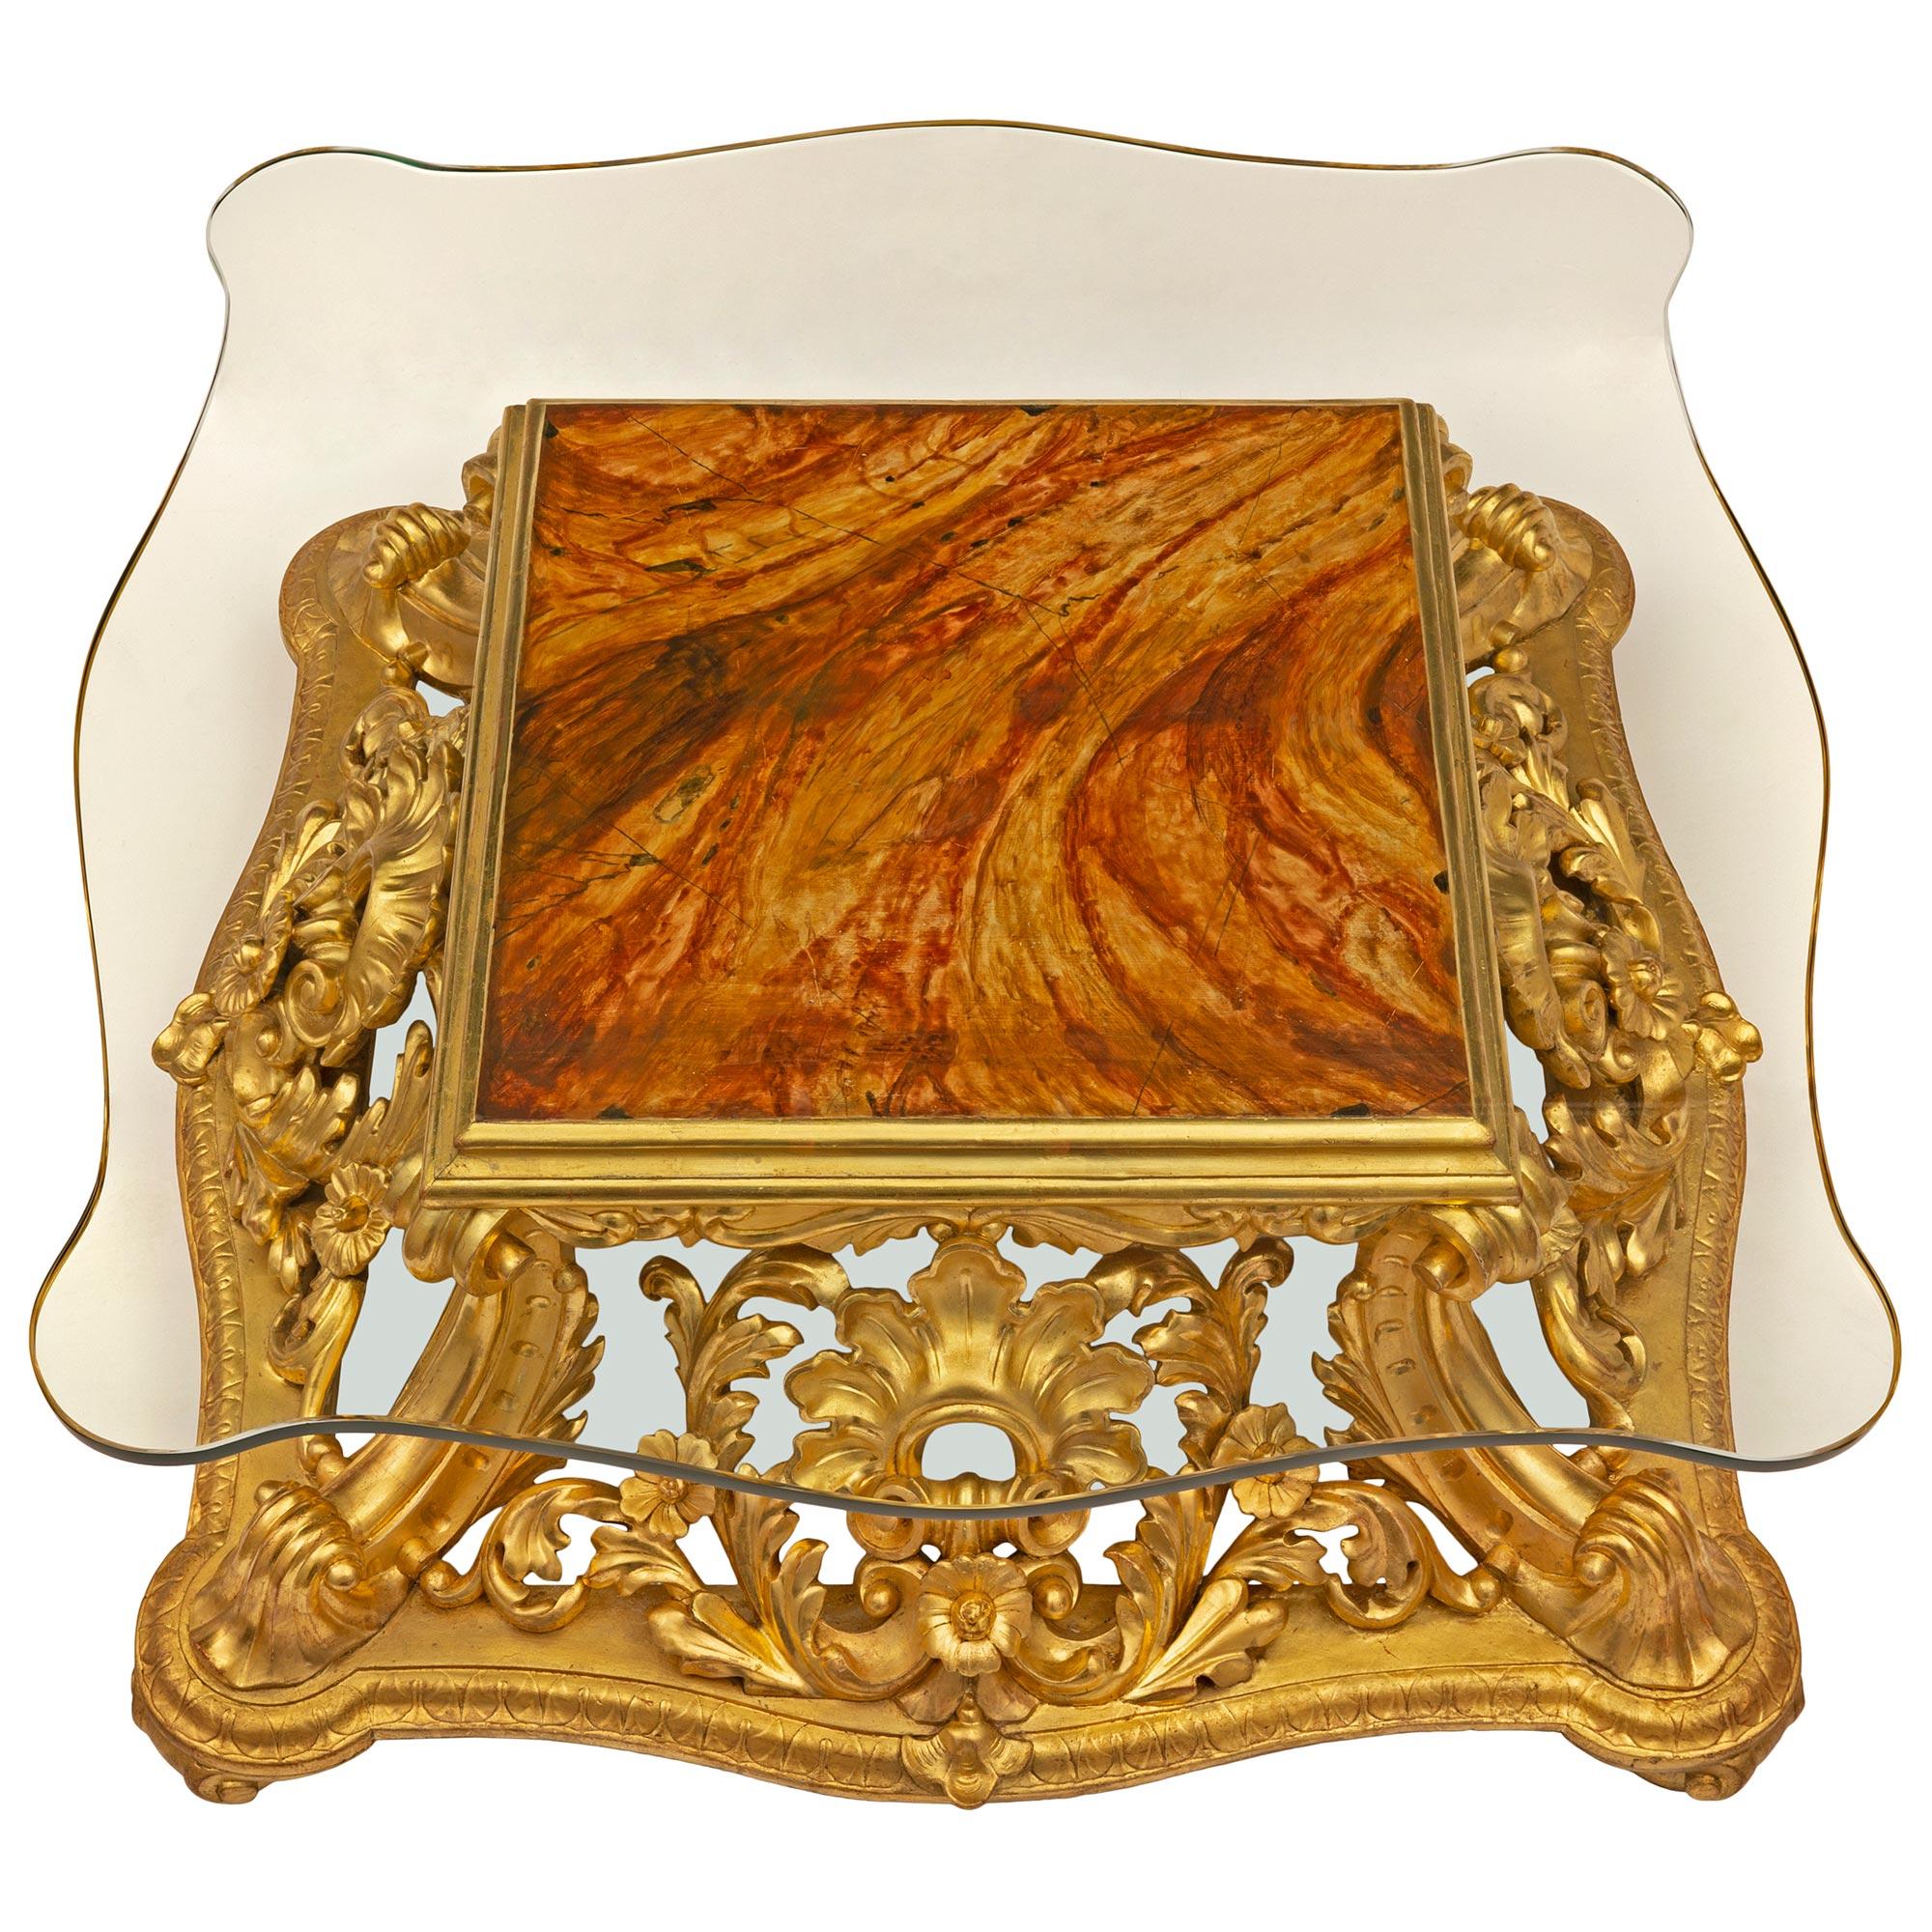 A stunning and very unique Italian 19th century Baroque st. giltwood, faux painted marble, and glass coffee table. The table is raised by an exceptional and most decorative scalloped shaped giltwood base with ball feet and exquisite richly carved